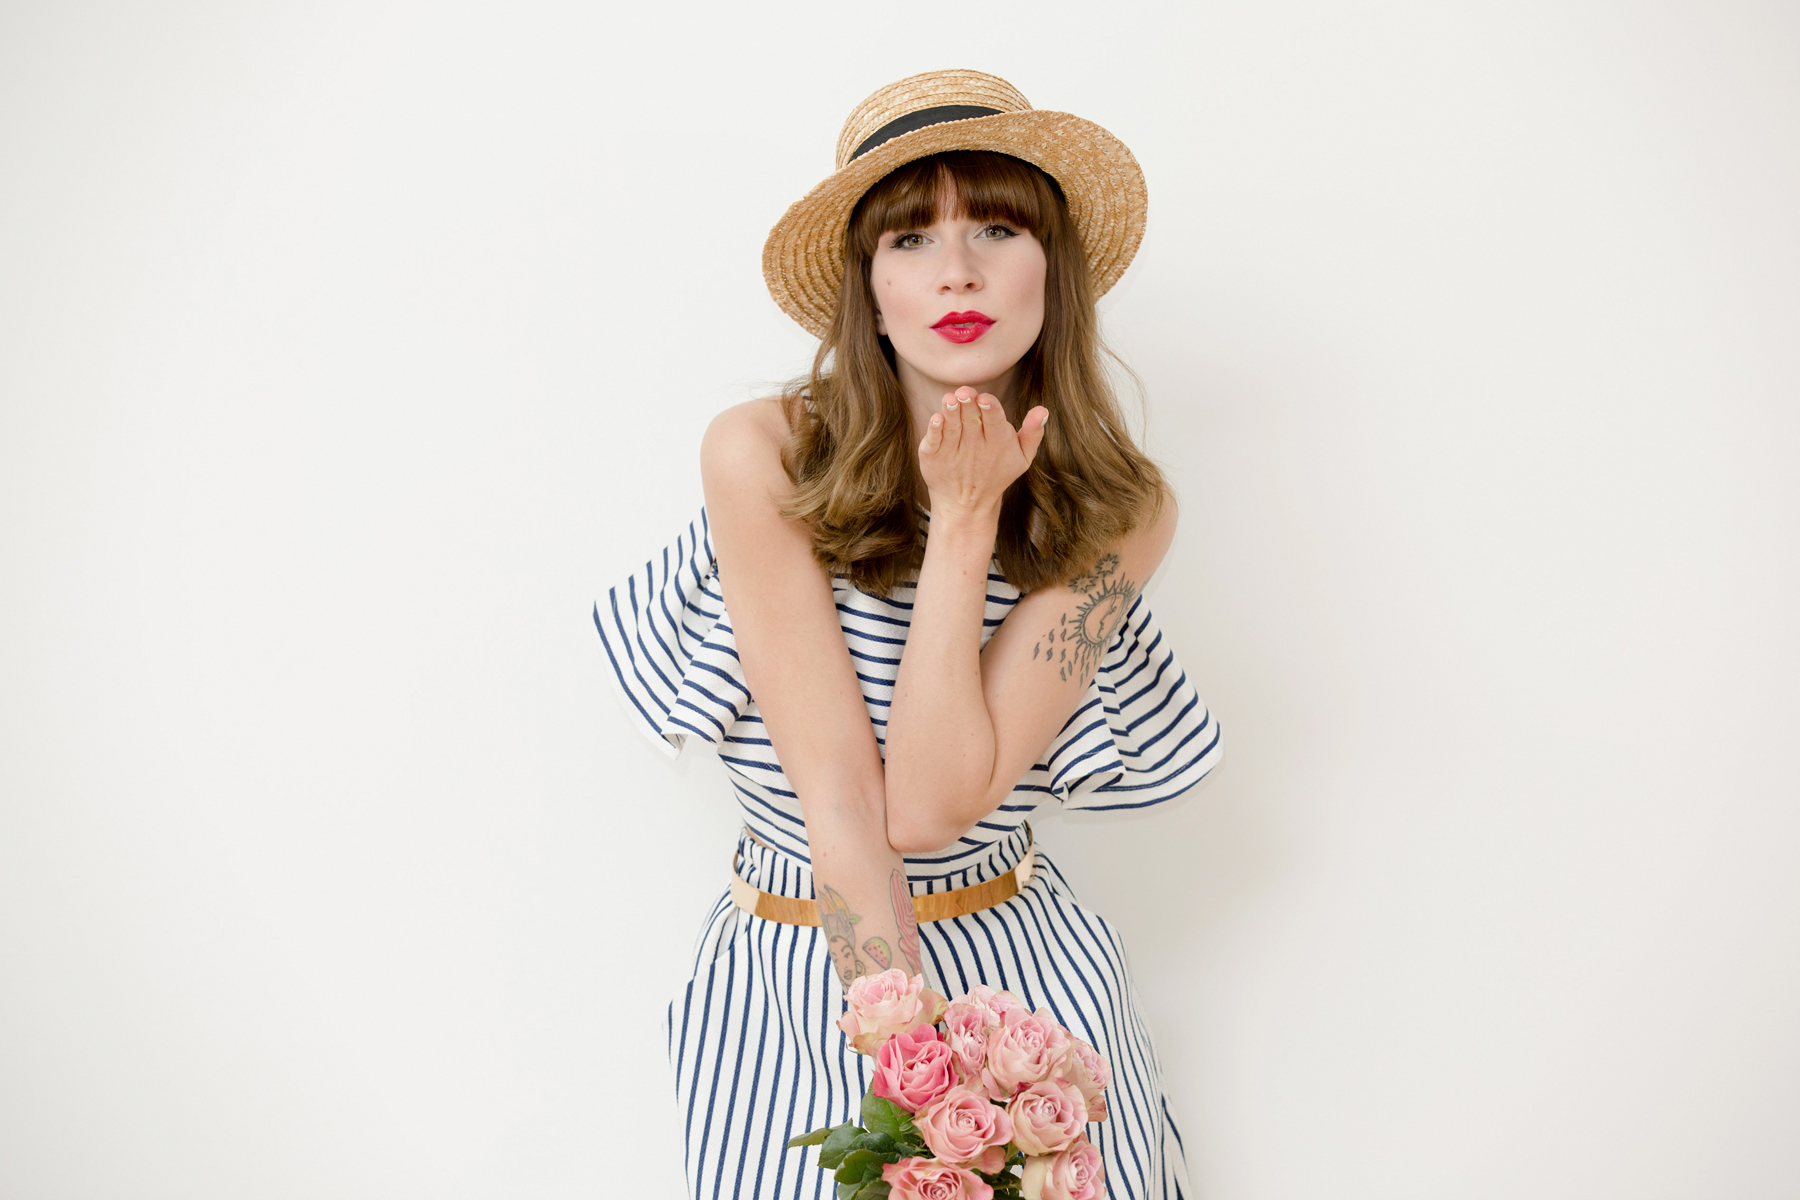 shopbop striped outfit styling topshop roses valentines day valentinstag hut 50s 60s cute girly girl bangs brunette red lips ootd outfit fashionblogger ricarda schernus cats & dogs blog 7